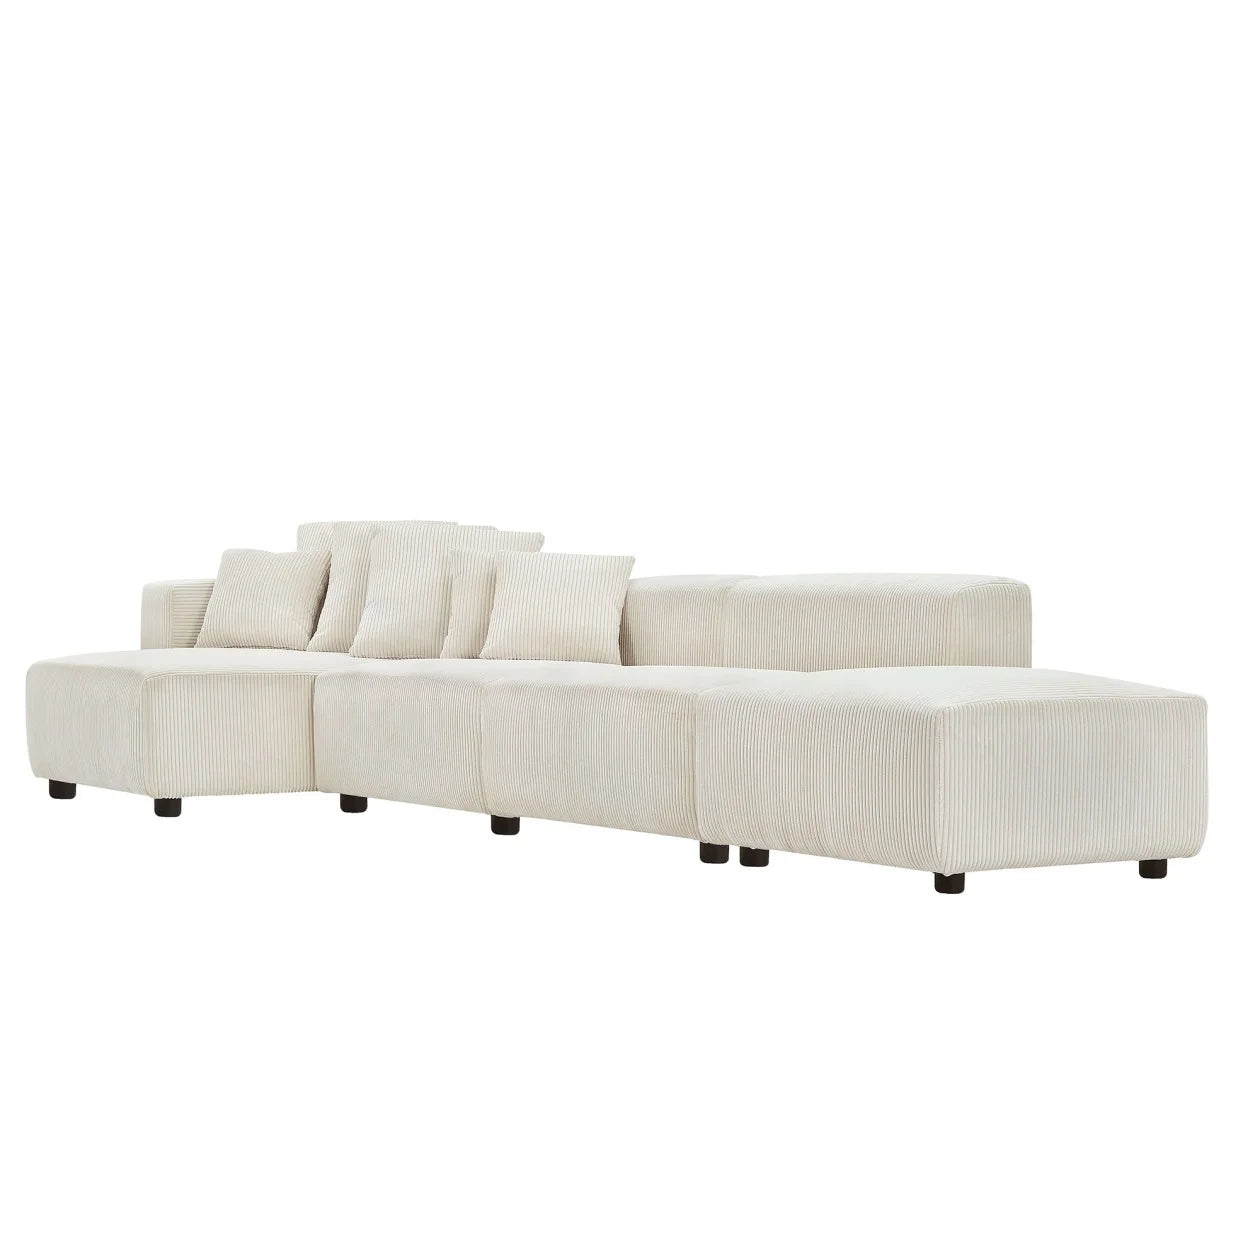 155" Sectional Modular Sofa, Modern L-Shaped Corduroy Upholstered Deep Seat Corner Sofa 4-Piece Set with Reversible Chaise, Minimalist Style Couch for Living Room, Apartment, Office, Beige